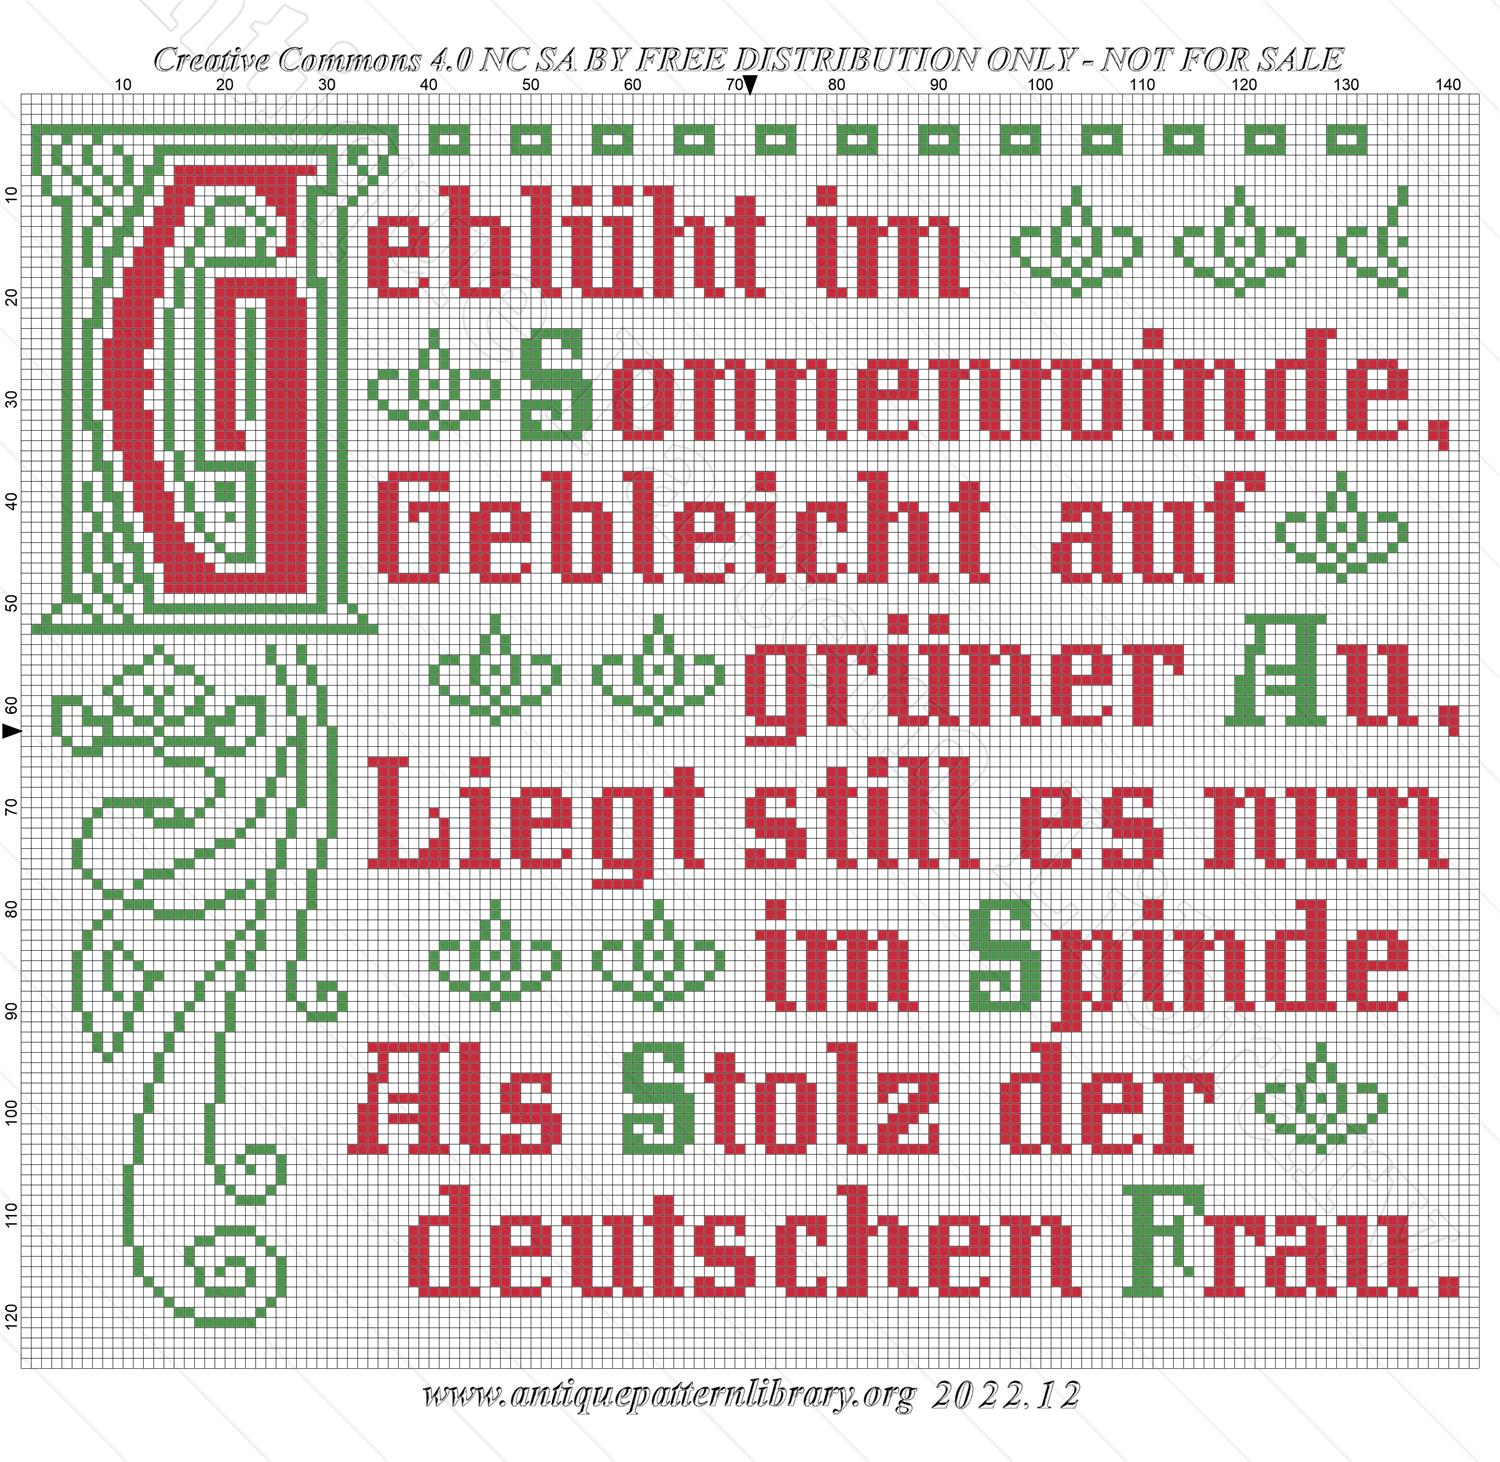 M-DK001 Eight traditional German maxims